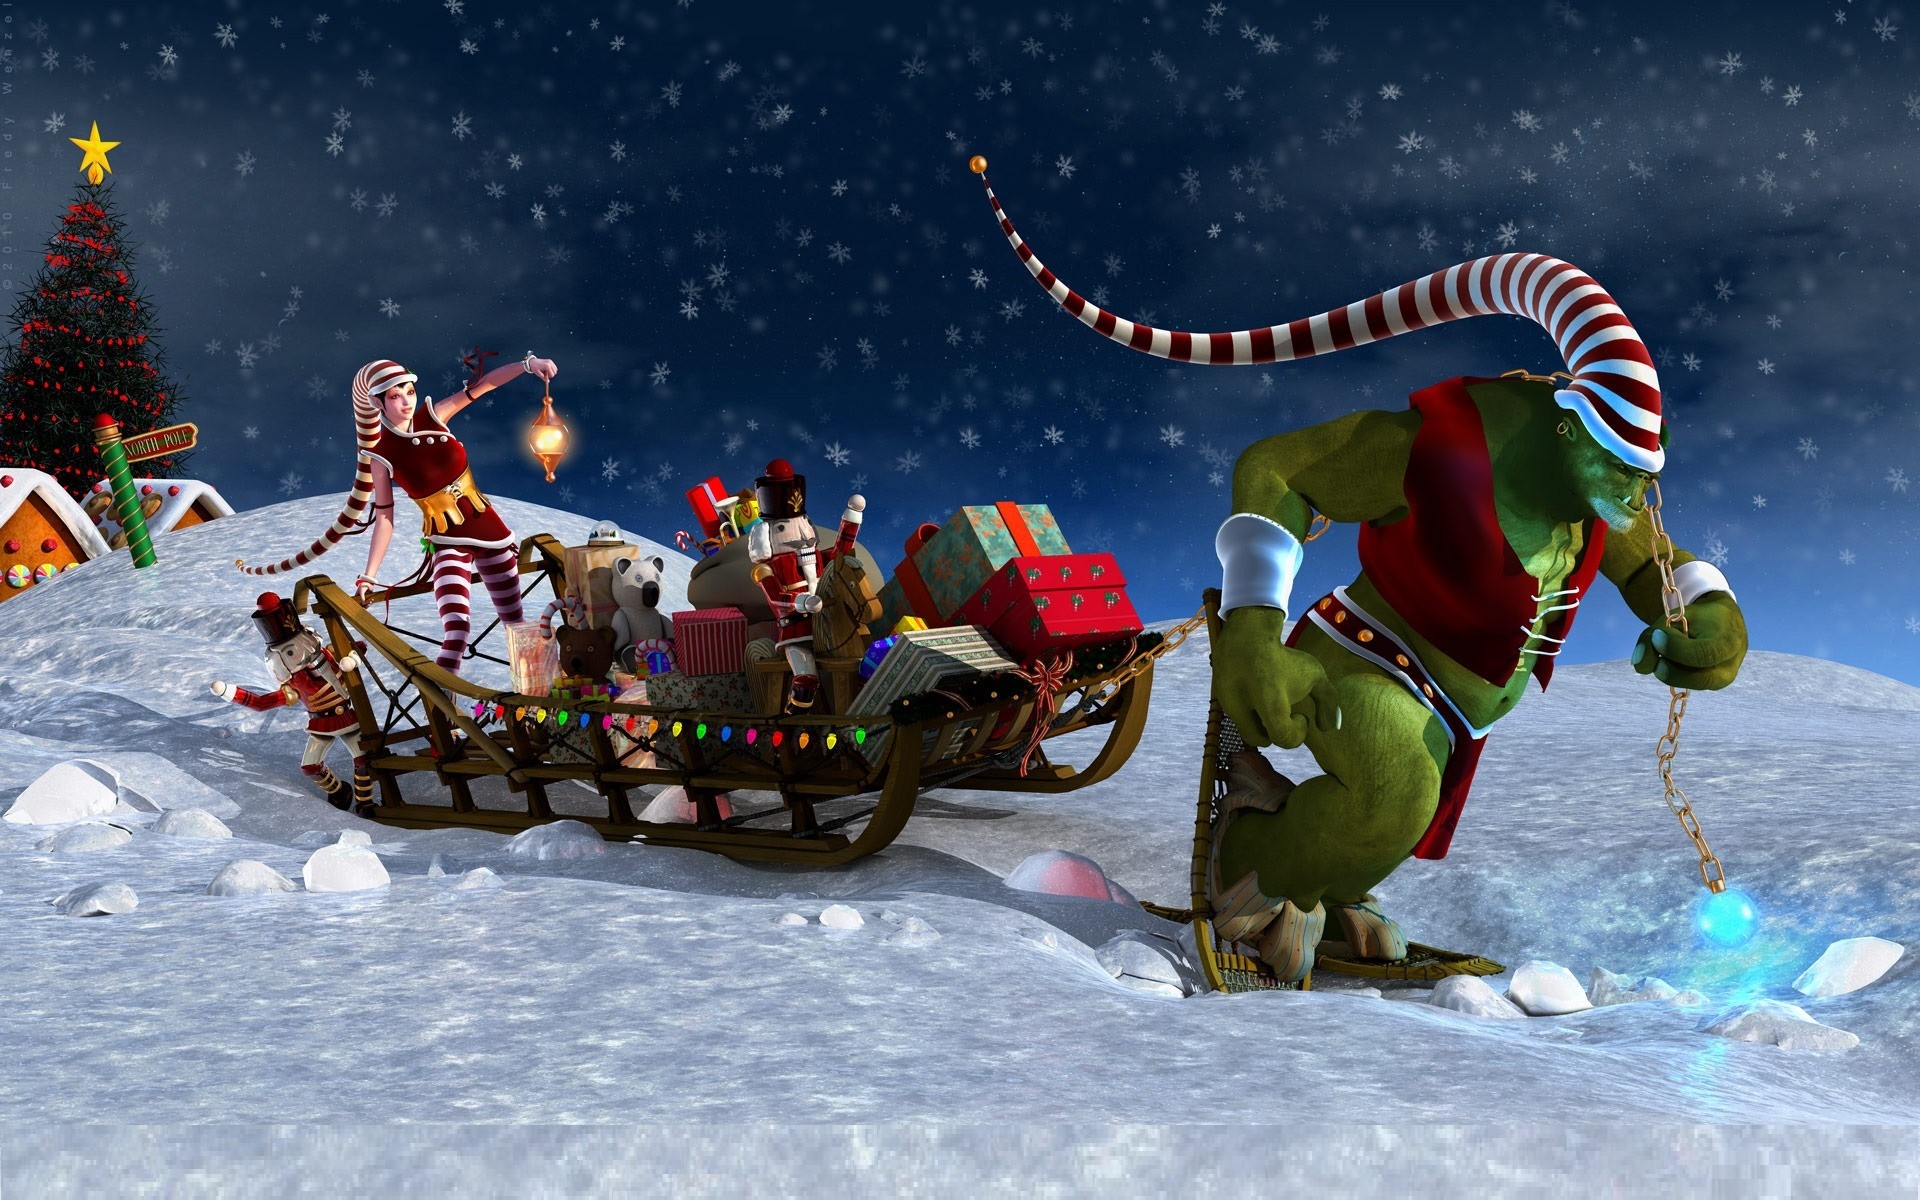 1920x1200 Christmas 3d Animated Wallpapers Free : Free d animated christmas wallpaper  wallpapersafari